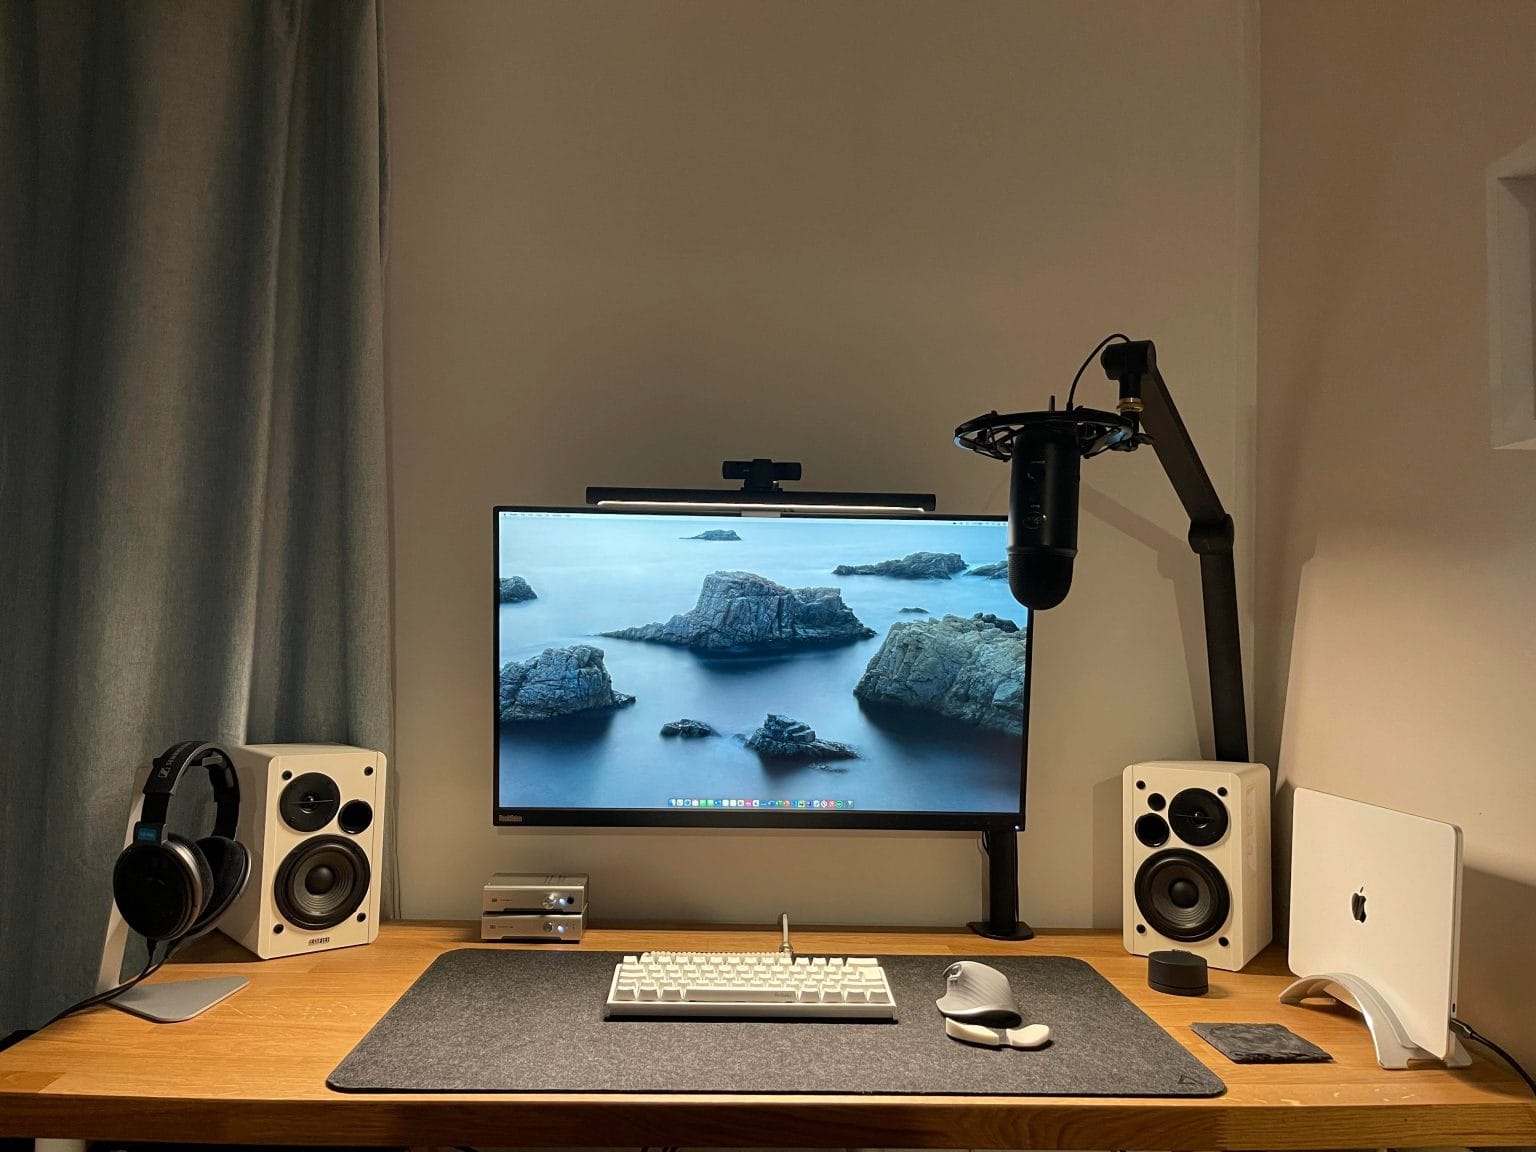 This MacBook Pro M1 setup is all about quality audio.